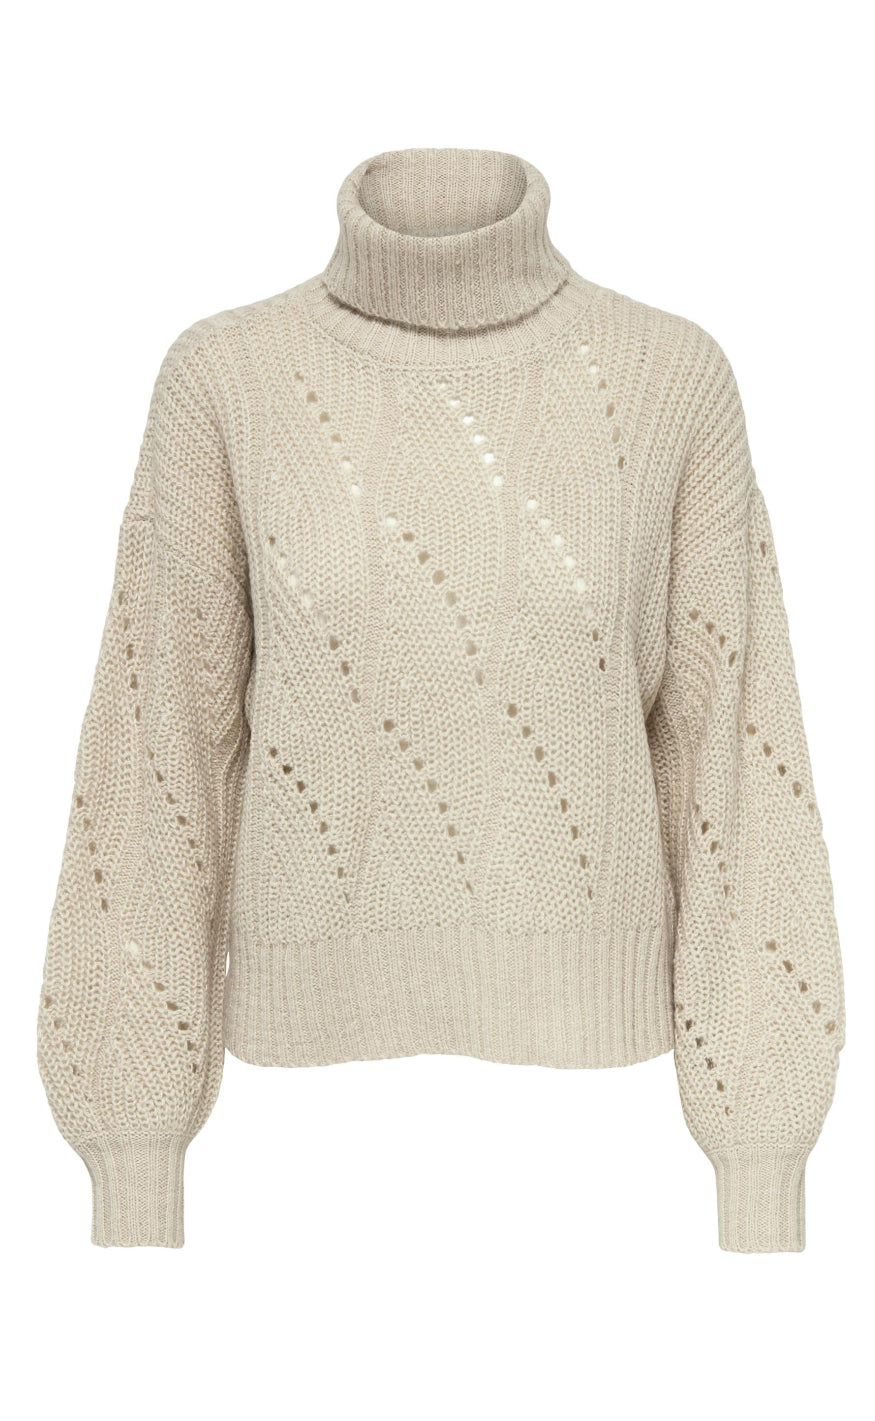 Billede af Only Sweater - Bea - Pumice Stone